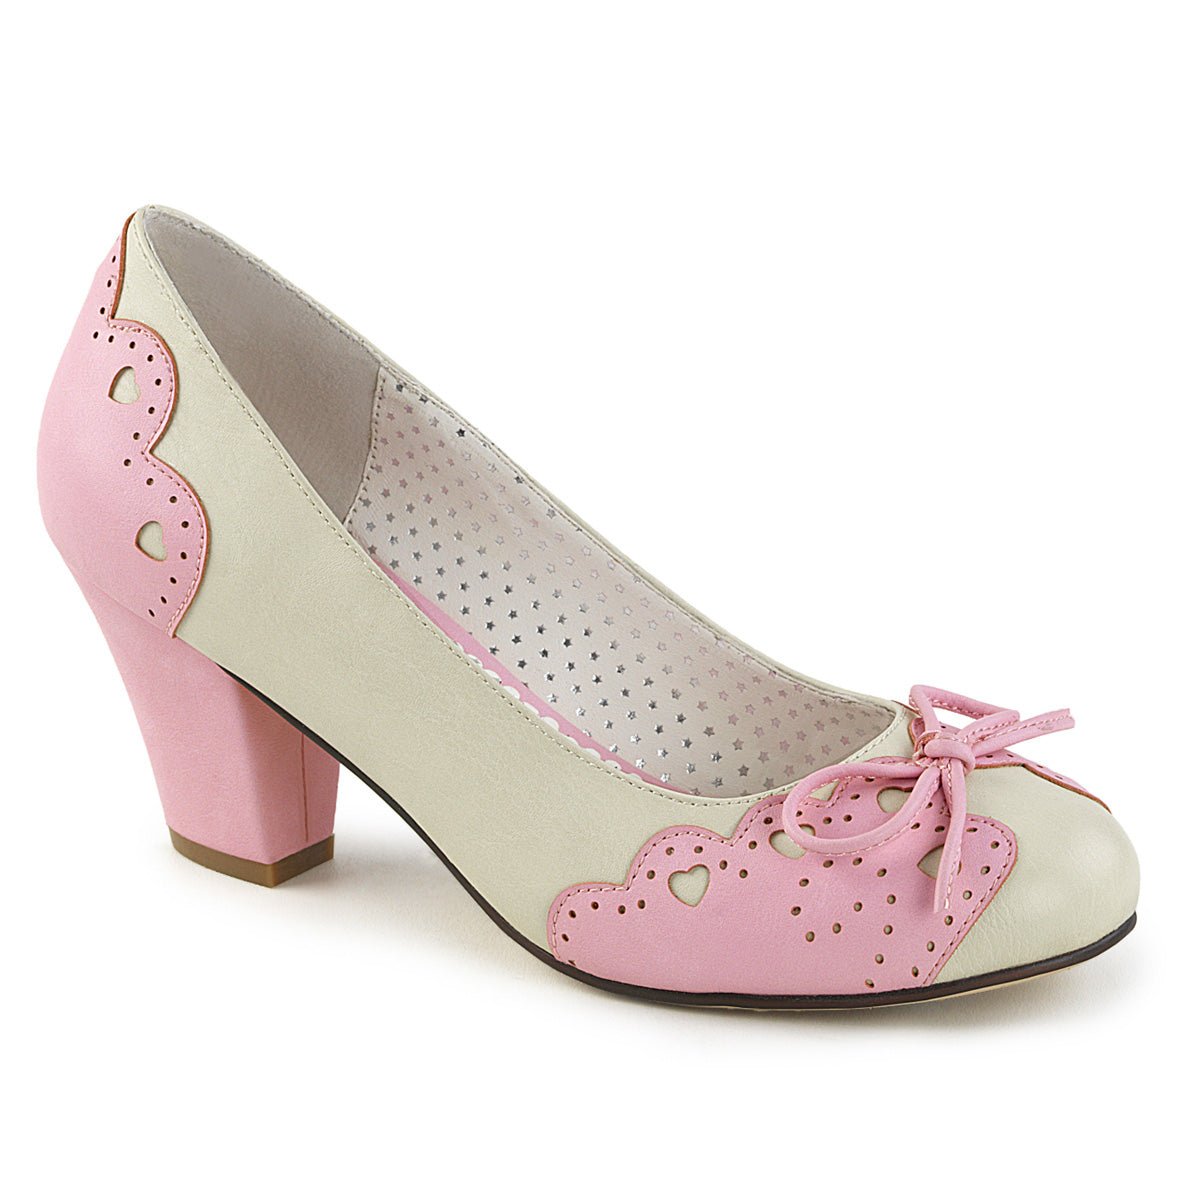 Clearance Pin-Up Wiggle 17 Cream/Baby Pink Size 5UK/8USA - From Clearance Sold By Alternative Footwear